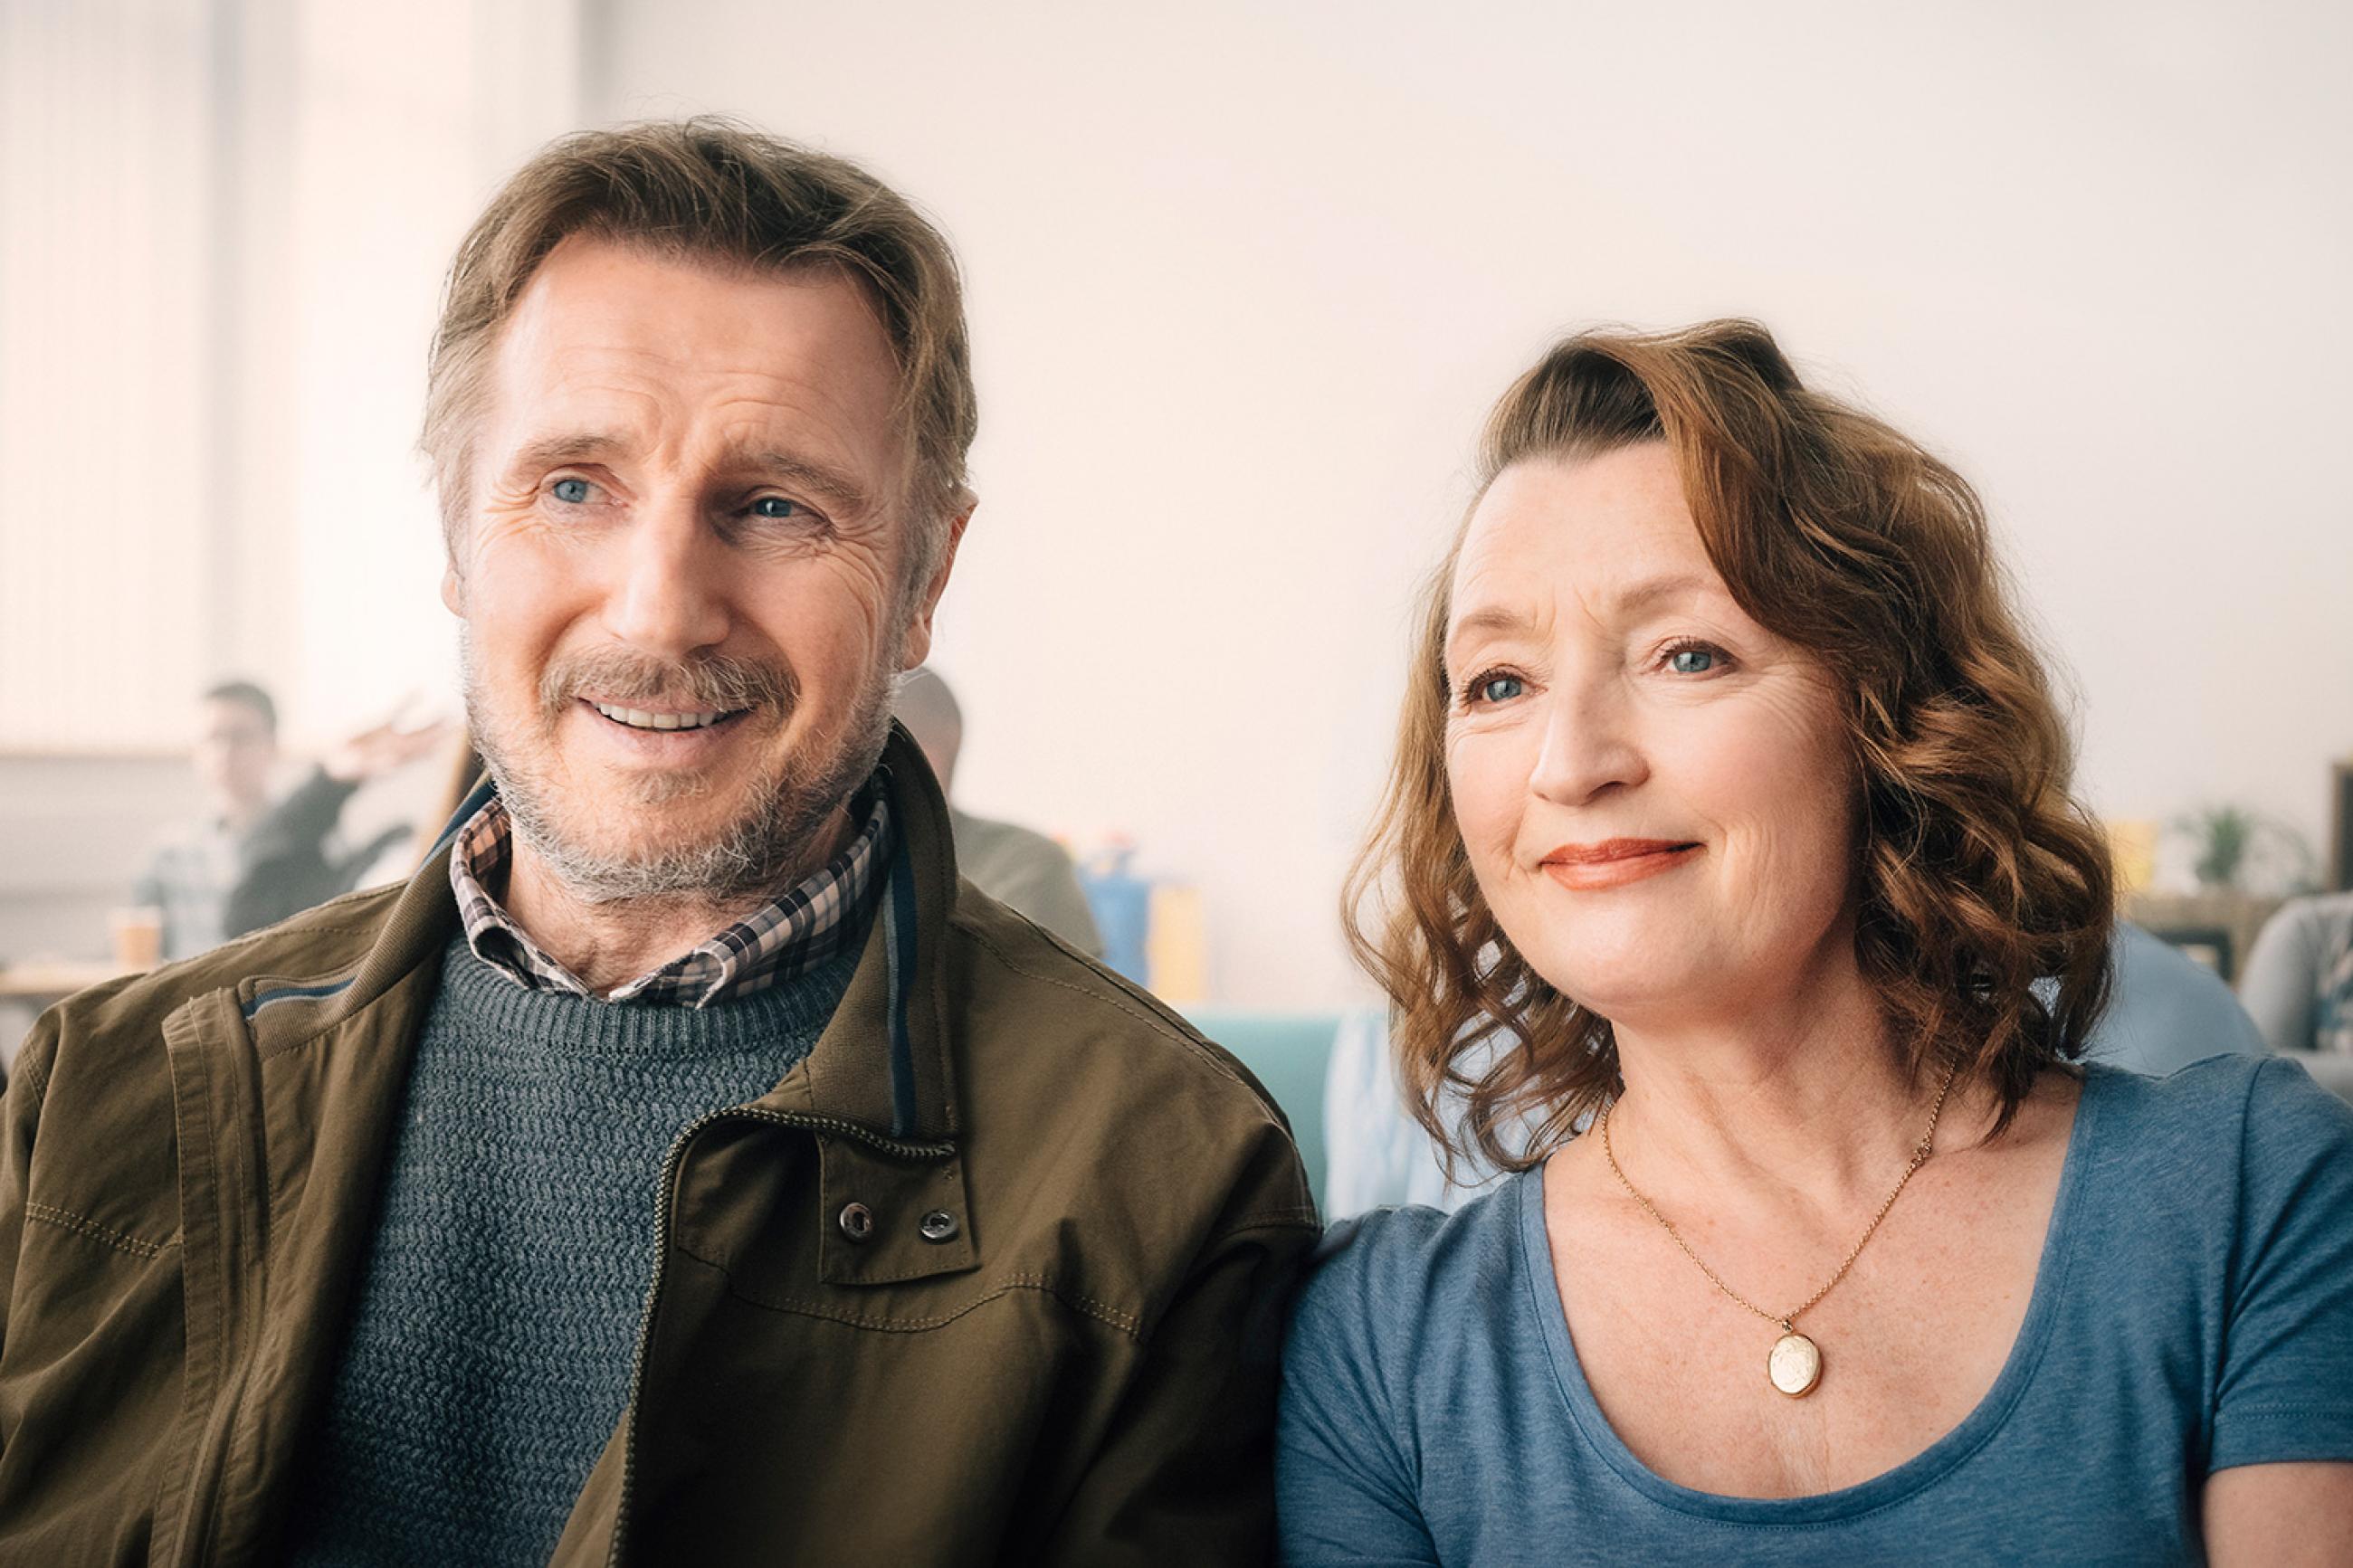 Liam Neeson and Lesley Manville give outstanding performances in the new film ORDINARY LOVE, from Bleecker Street, and they are helped by a powerful, semi-autobiographical script by Owen McCafferty. Image is of the two actors sitting together and smiling in a hospital waiting room. Credit: Aidan Monaghan/Bleecker Street